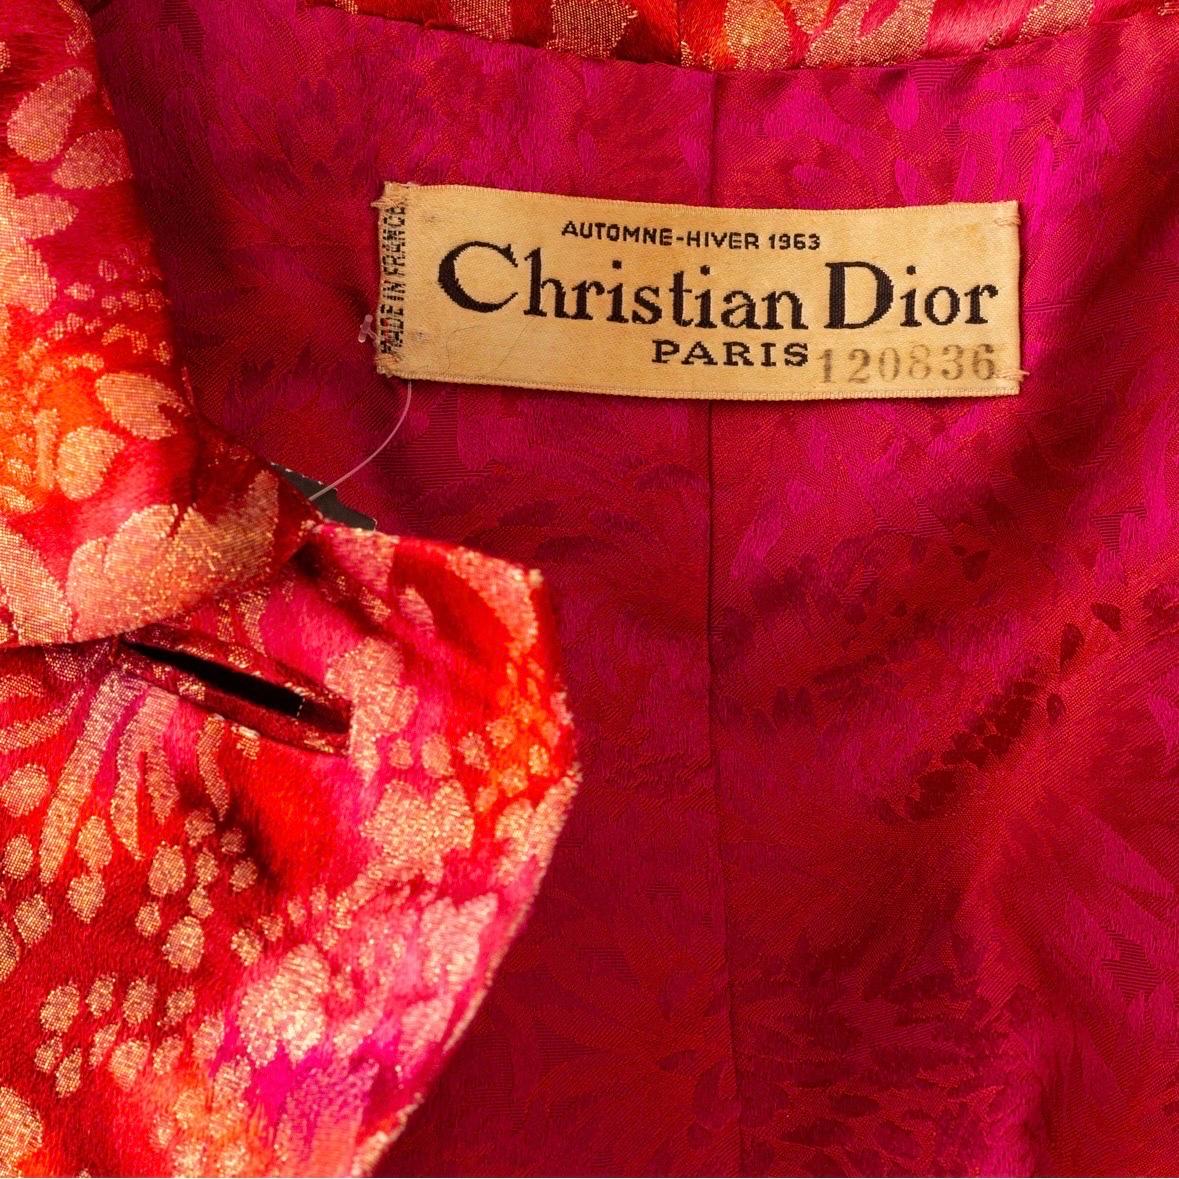 Christian Dior 1963 Red and Gold Brocade Fur Trim Opera Coat

Fall 1963 Collection by Marc Bohan
Red/Pink/Gold Lurex/Metallic
Floral brocade motif
Pointed collar
Fur trim cuffs
Fabric covered buttons
Front flap pockets
Front button closure
Back vent